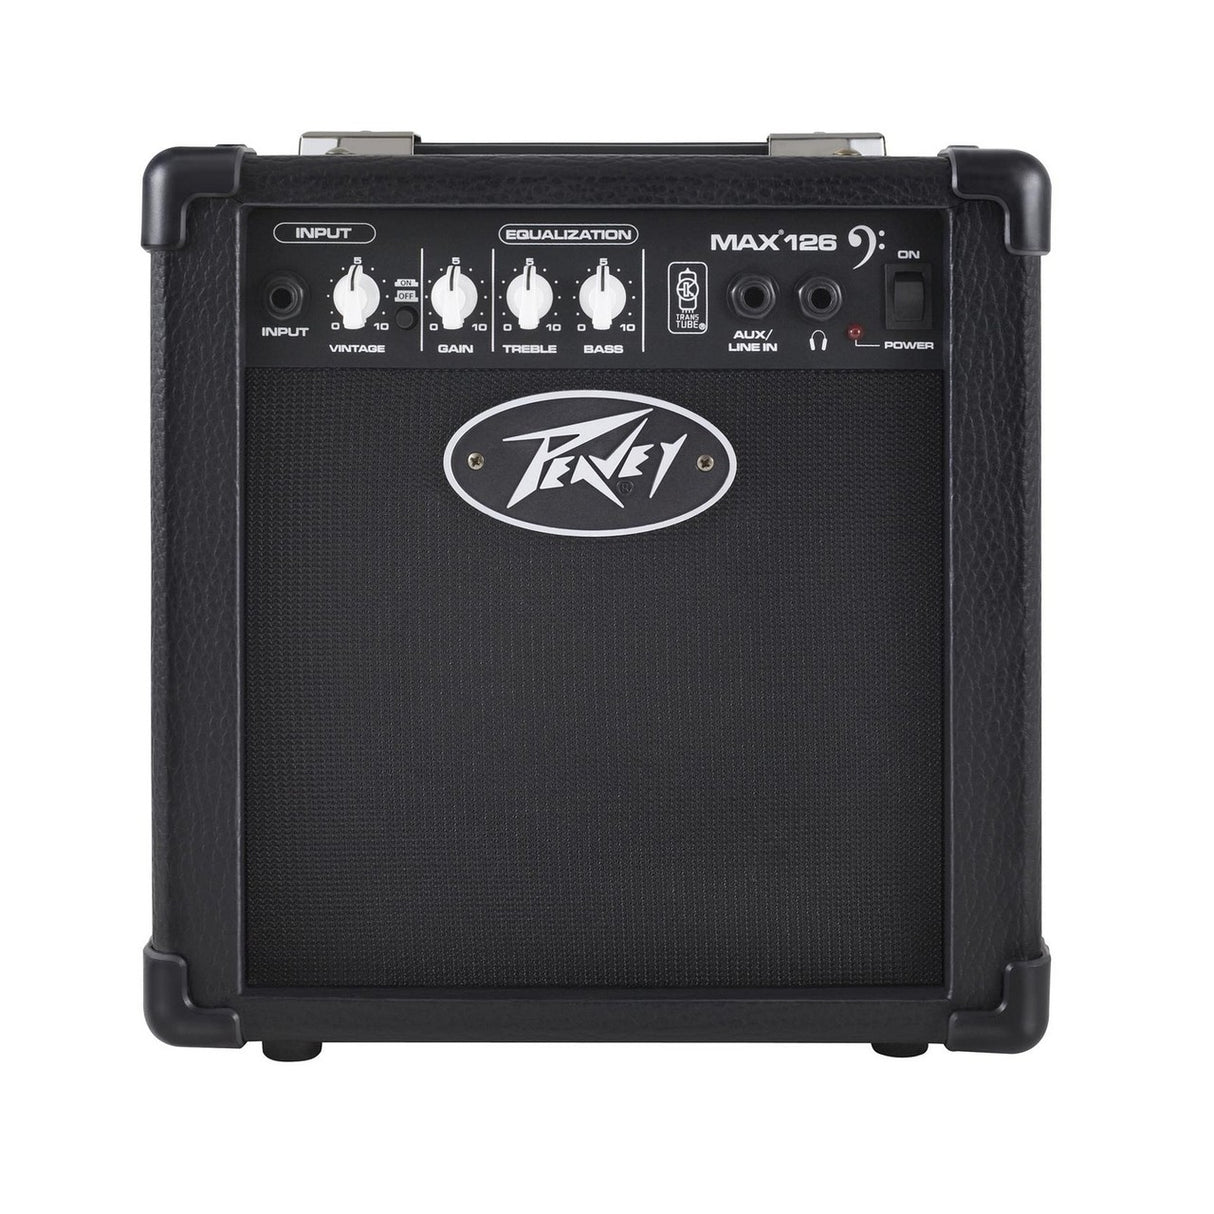 Peavey MAX 126 10 Watts 4 Ohms Multi Band EQ Practice Bass Combo Amplifier (Used)